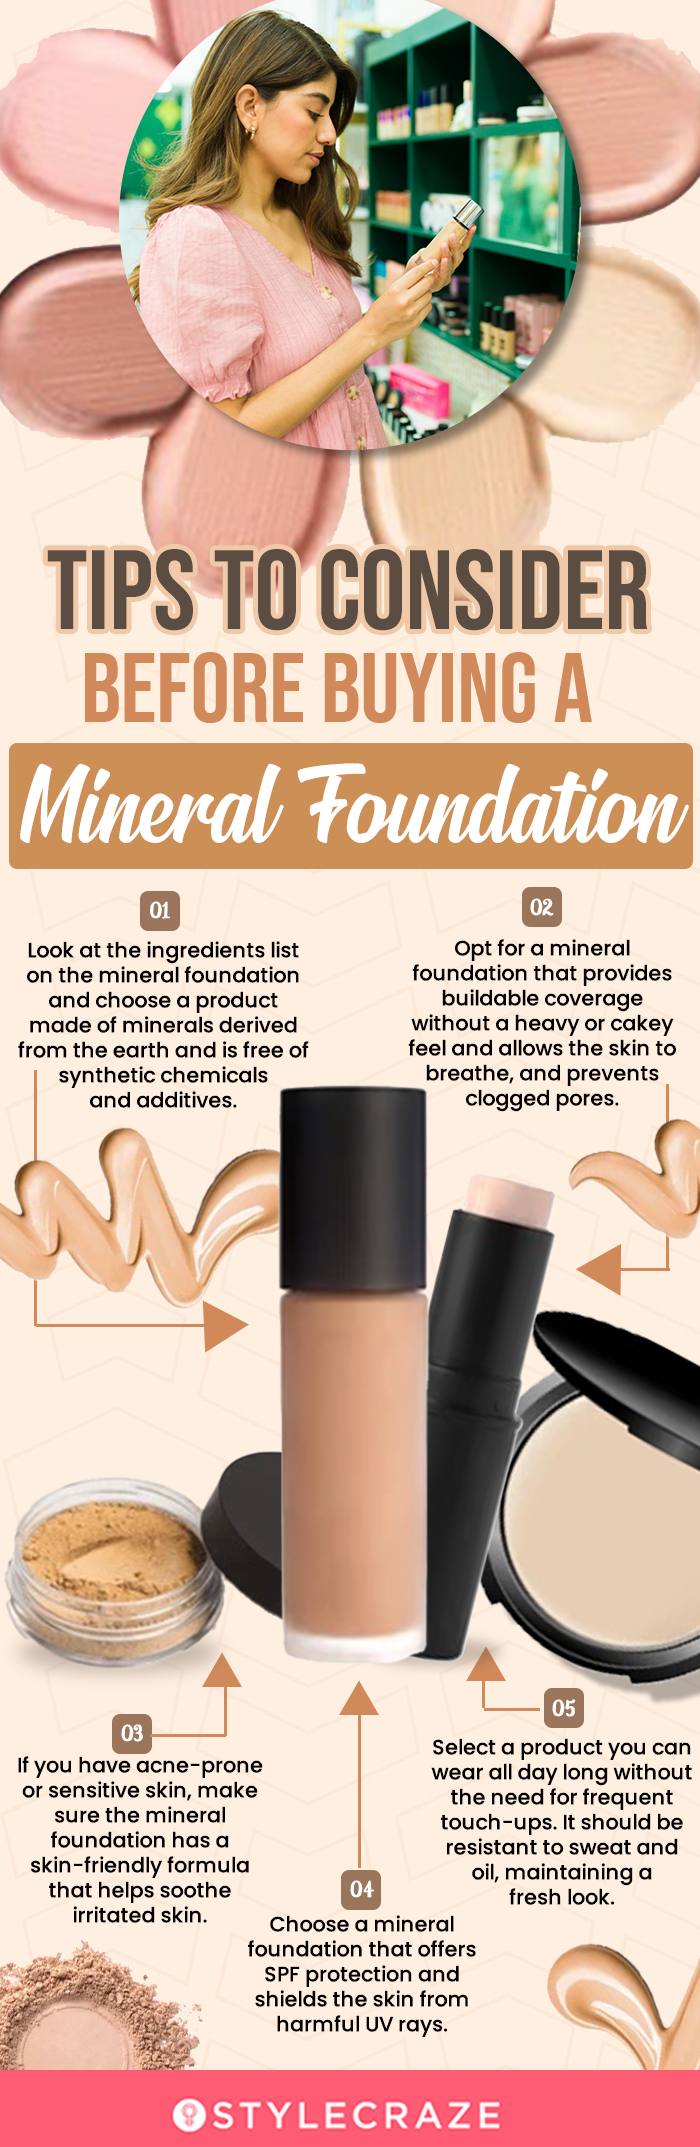 Tips To Consider Before Buying A Mineral Foundation (infographic)